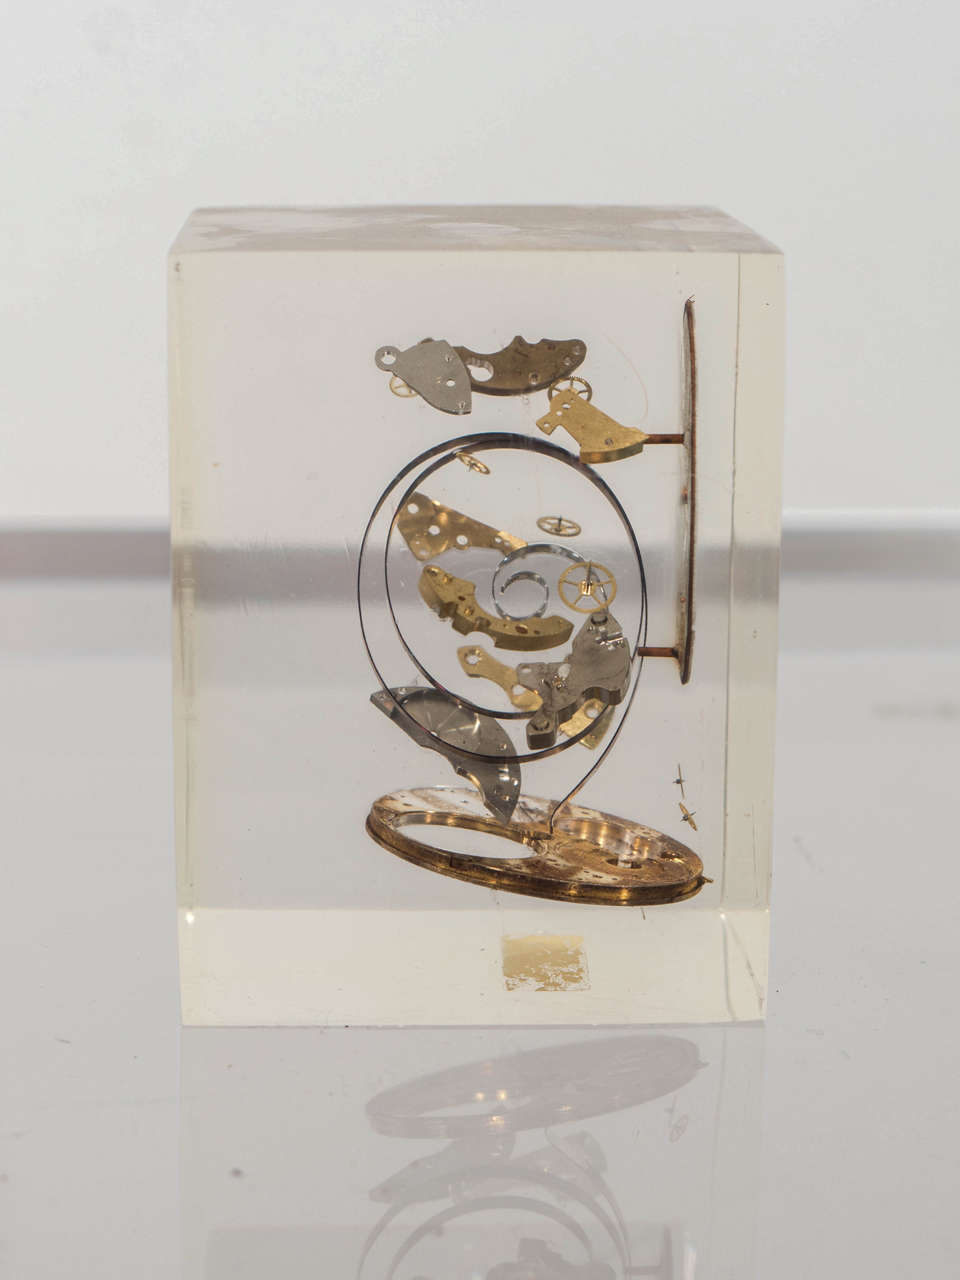 Resin Set of Three Objects with Clock Parts by Pierre Giraudon, France circa 1960